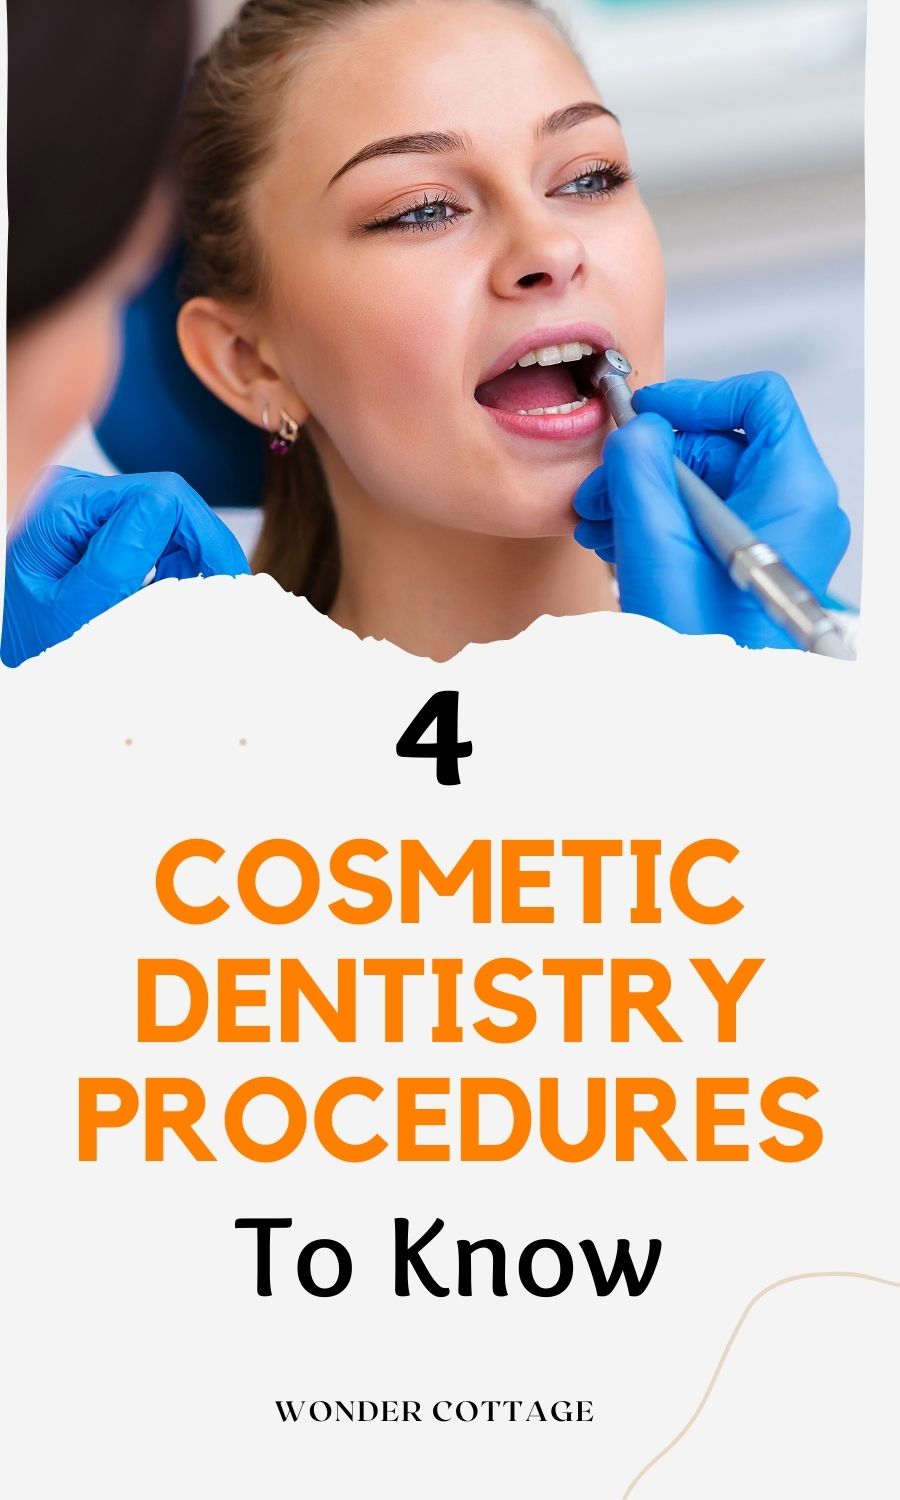 4 cosmetic dentistry procedures to know